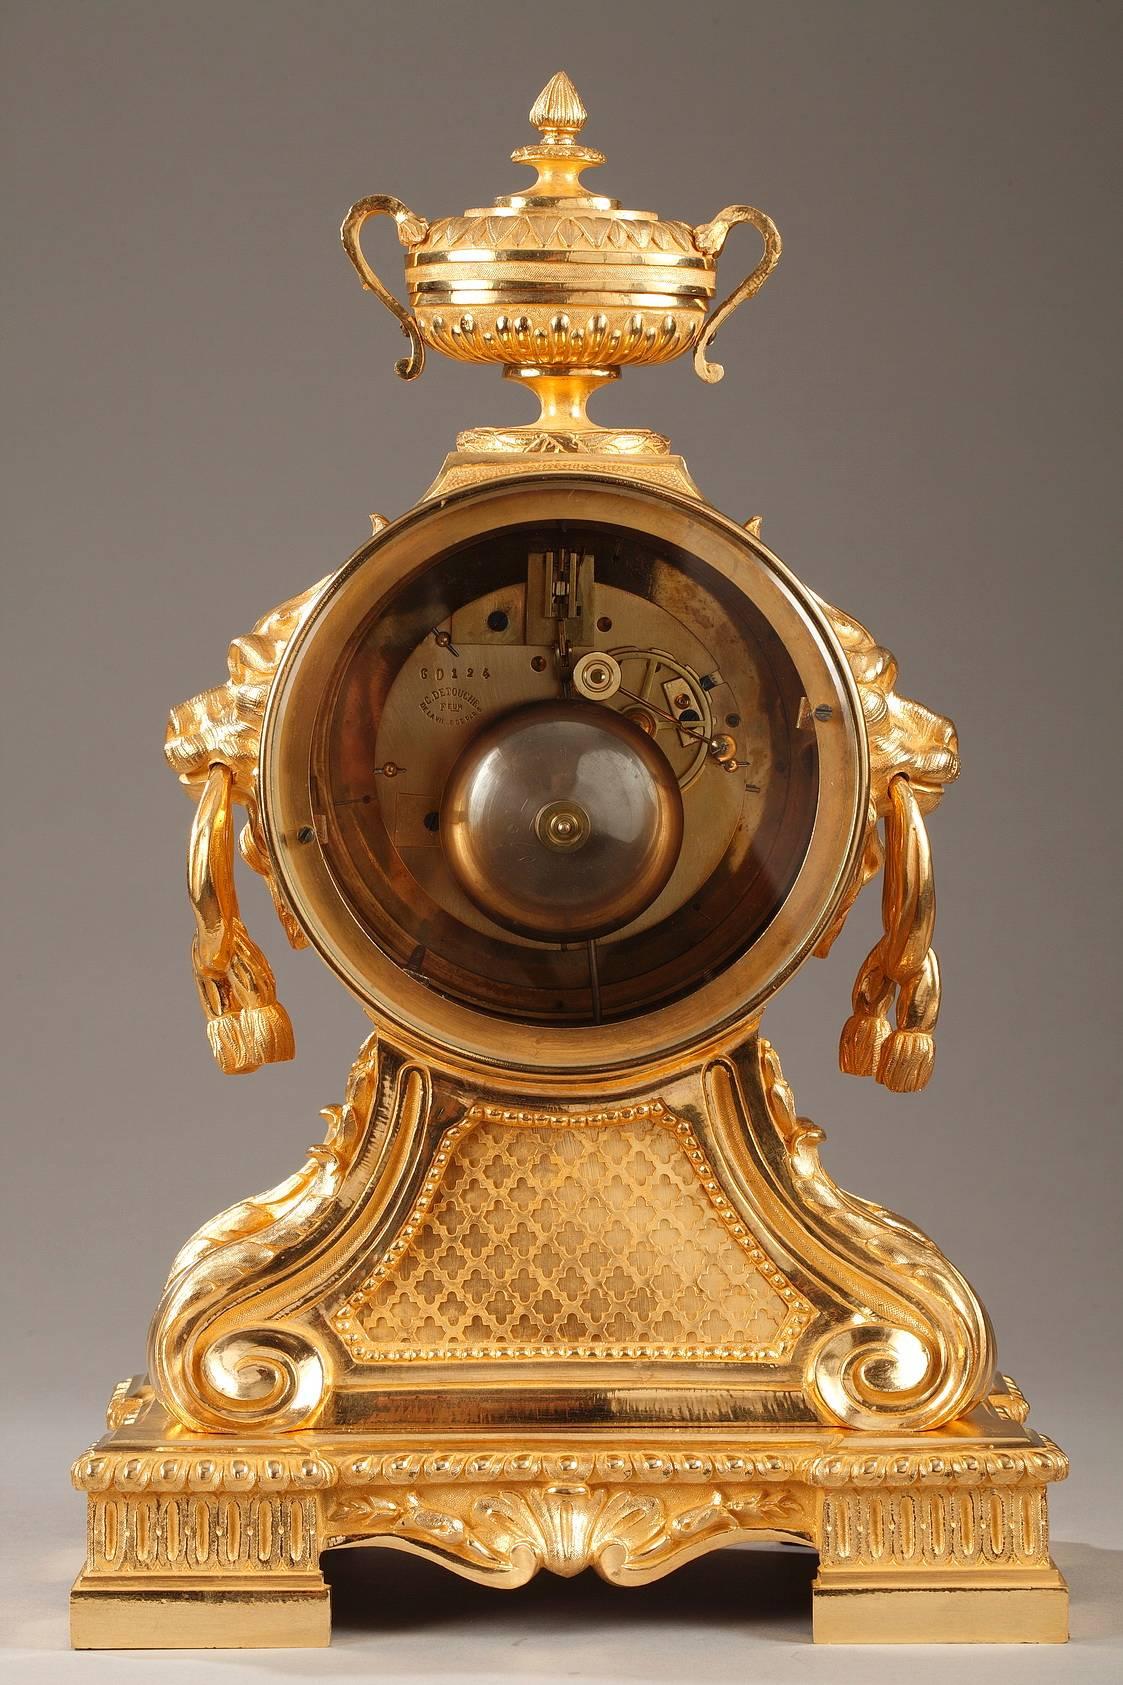 Napoleon III gilt bronze mantel clock in Louis XVI style. The clock is topped with a vase and supported by four scrolling consoles that are sculpted with laurel garlands. The enamel dial marks the hours with Roman numerals and the minutes with